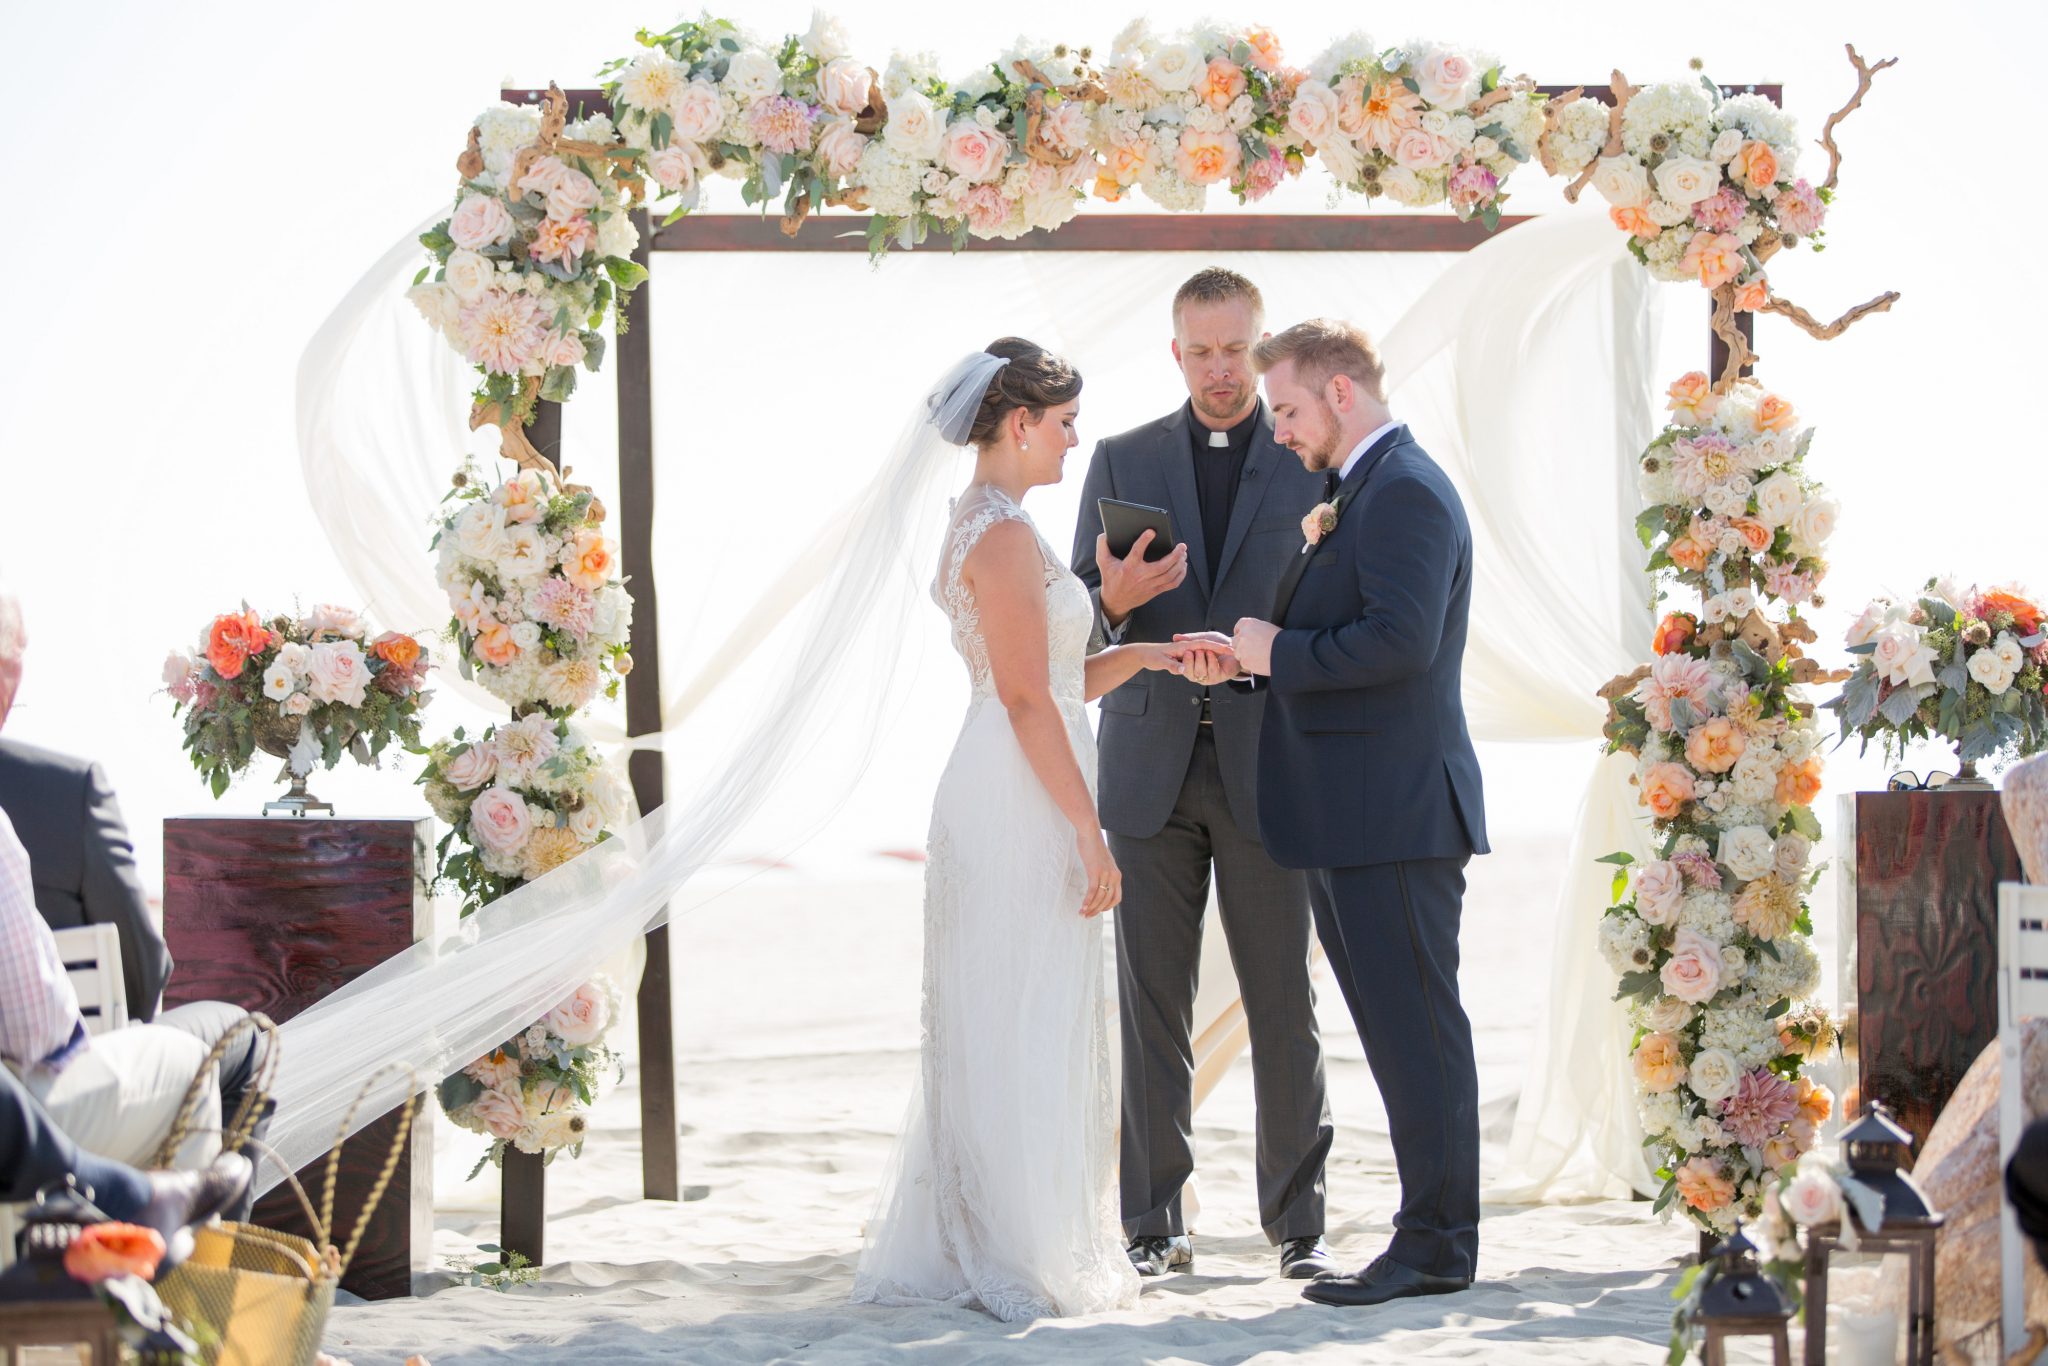 Leslie and Noah standing under their wedding arch during their beach wedding